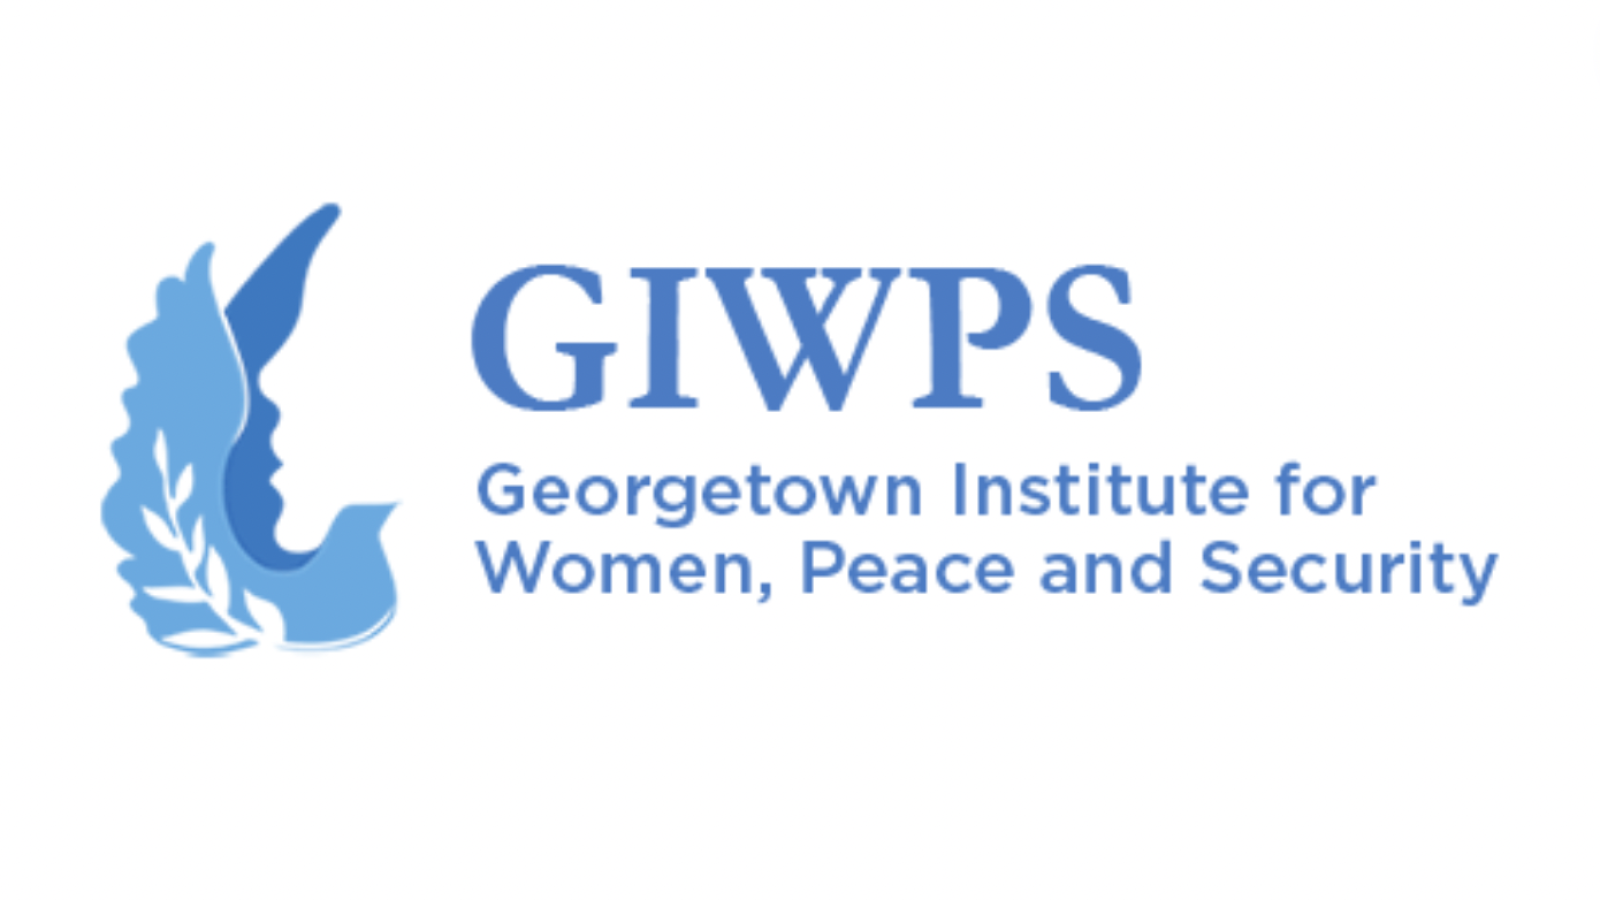 Georgetown Institute for Women, Peace and Security logo